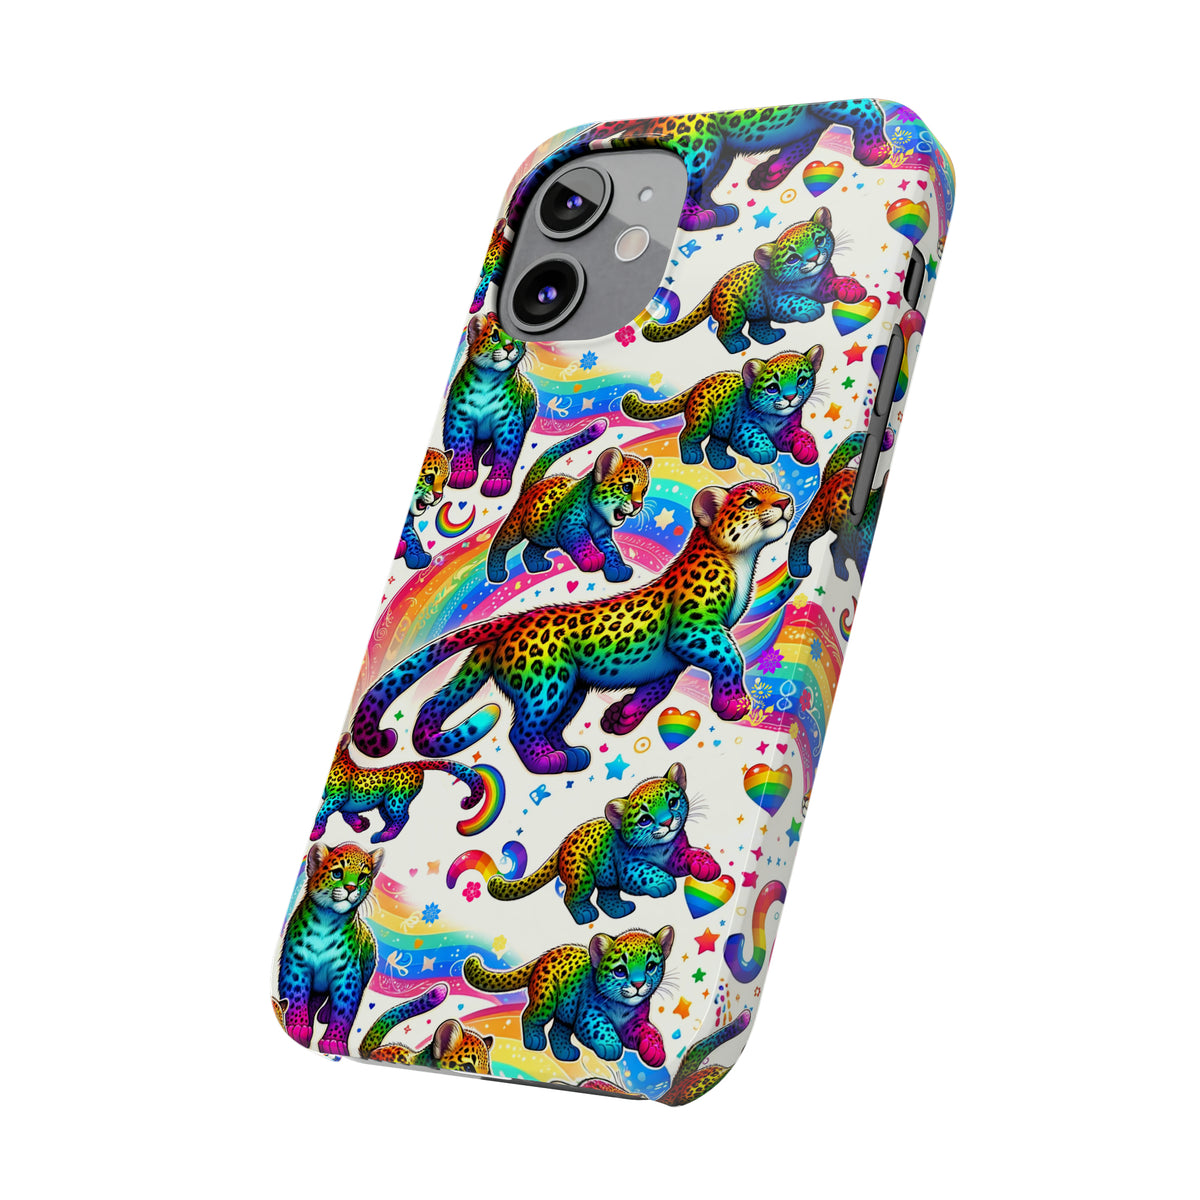 Leopard Lisa Frank Inspired Colorful Phone Case